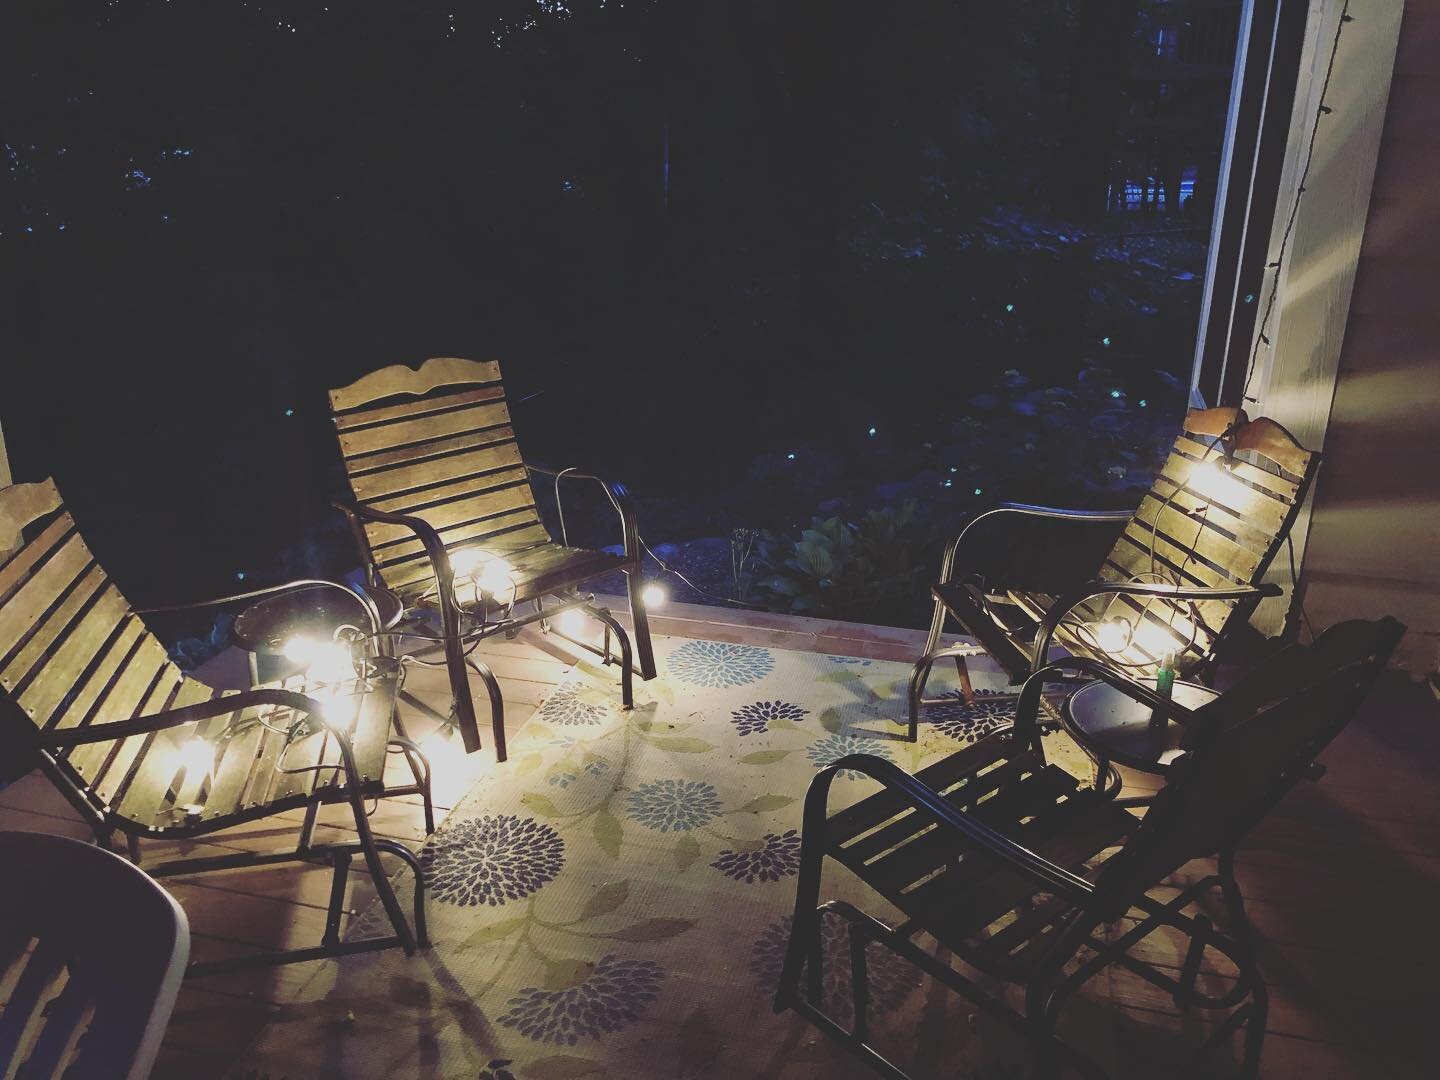 While organizing my patio lights, I witnessed my first fireflies of the season! #magical #fireflies #summernights #outdoorspaces 🤍💫